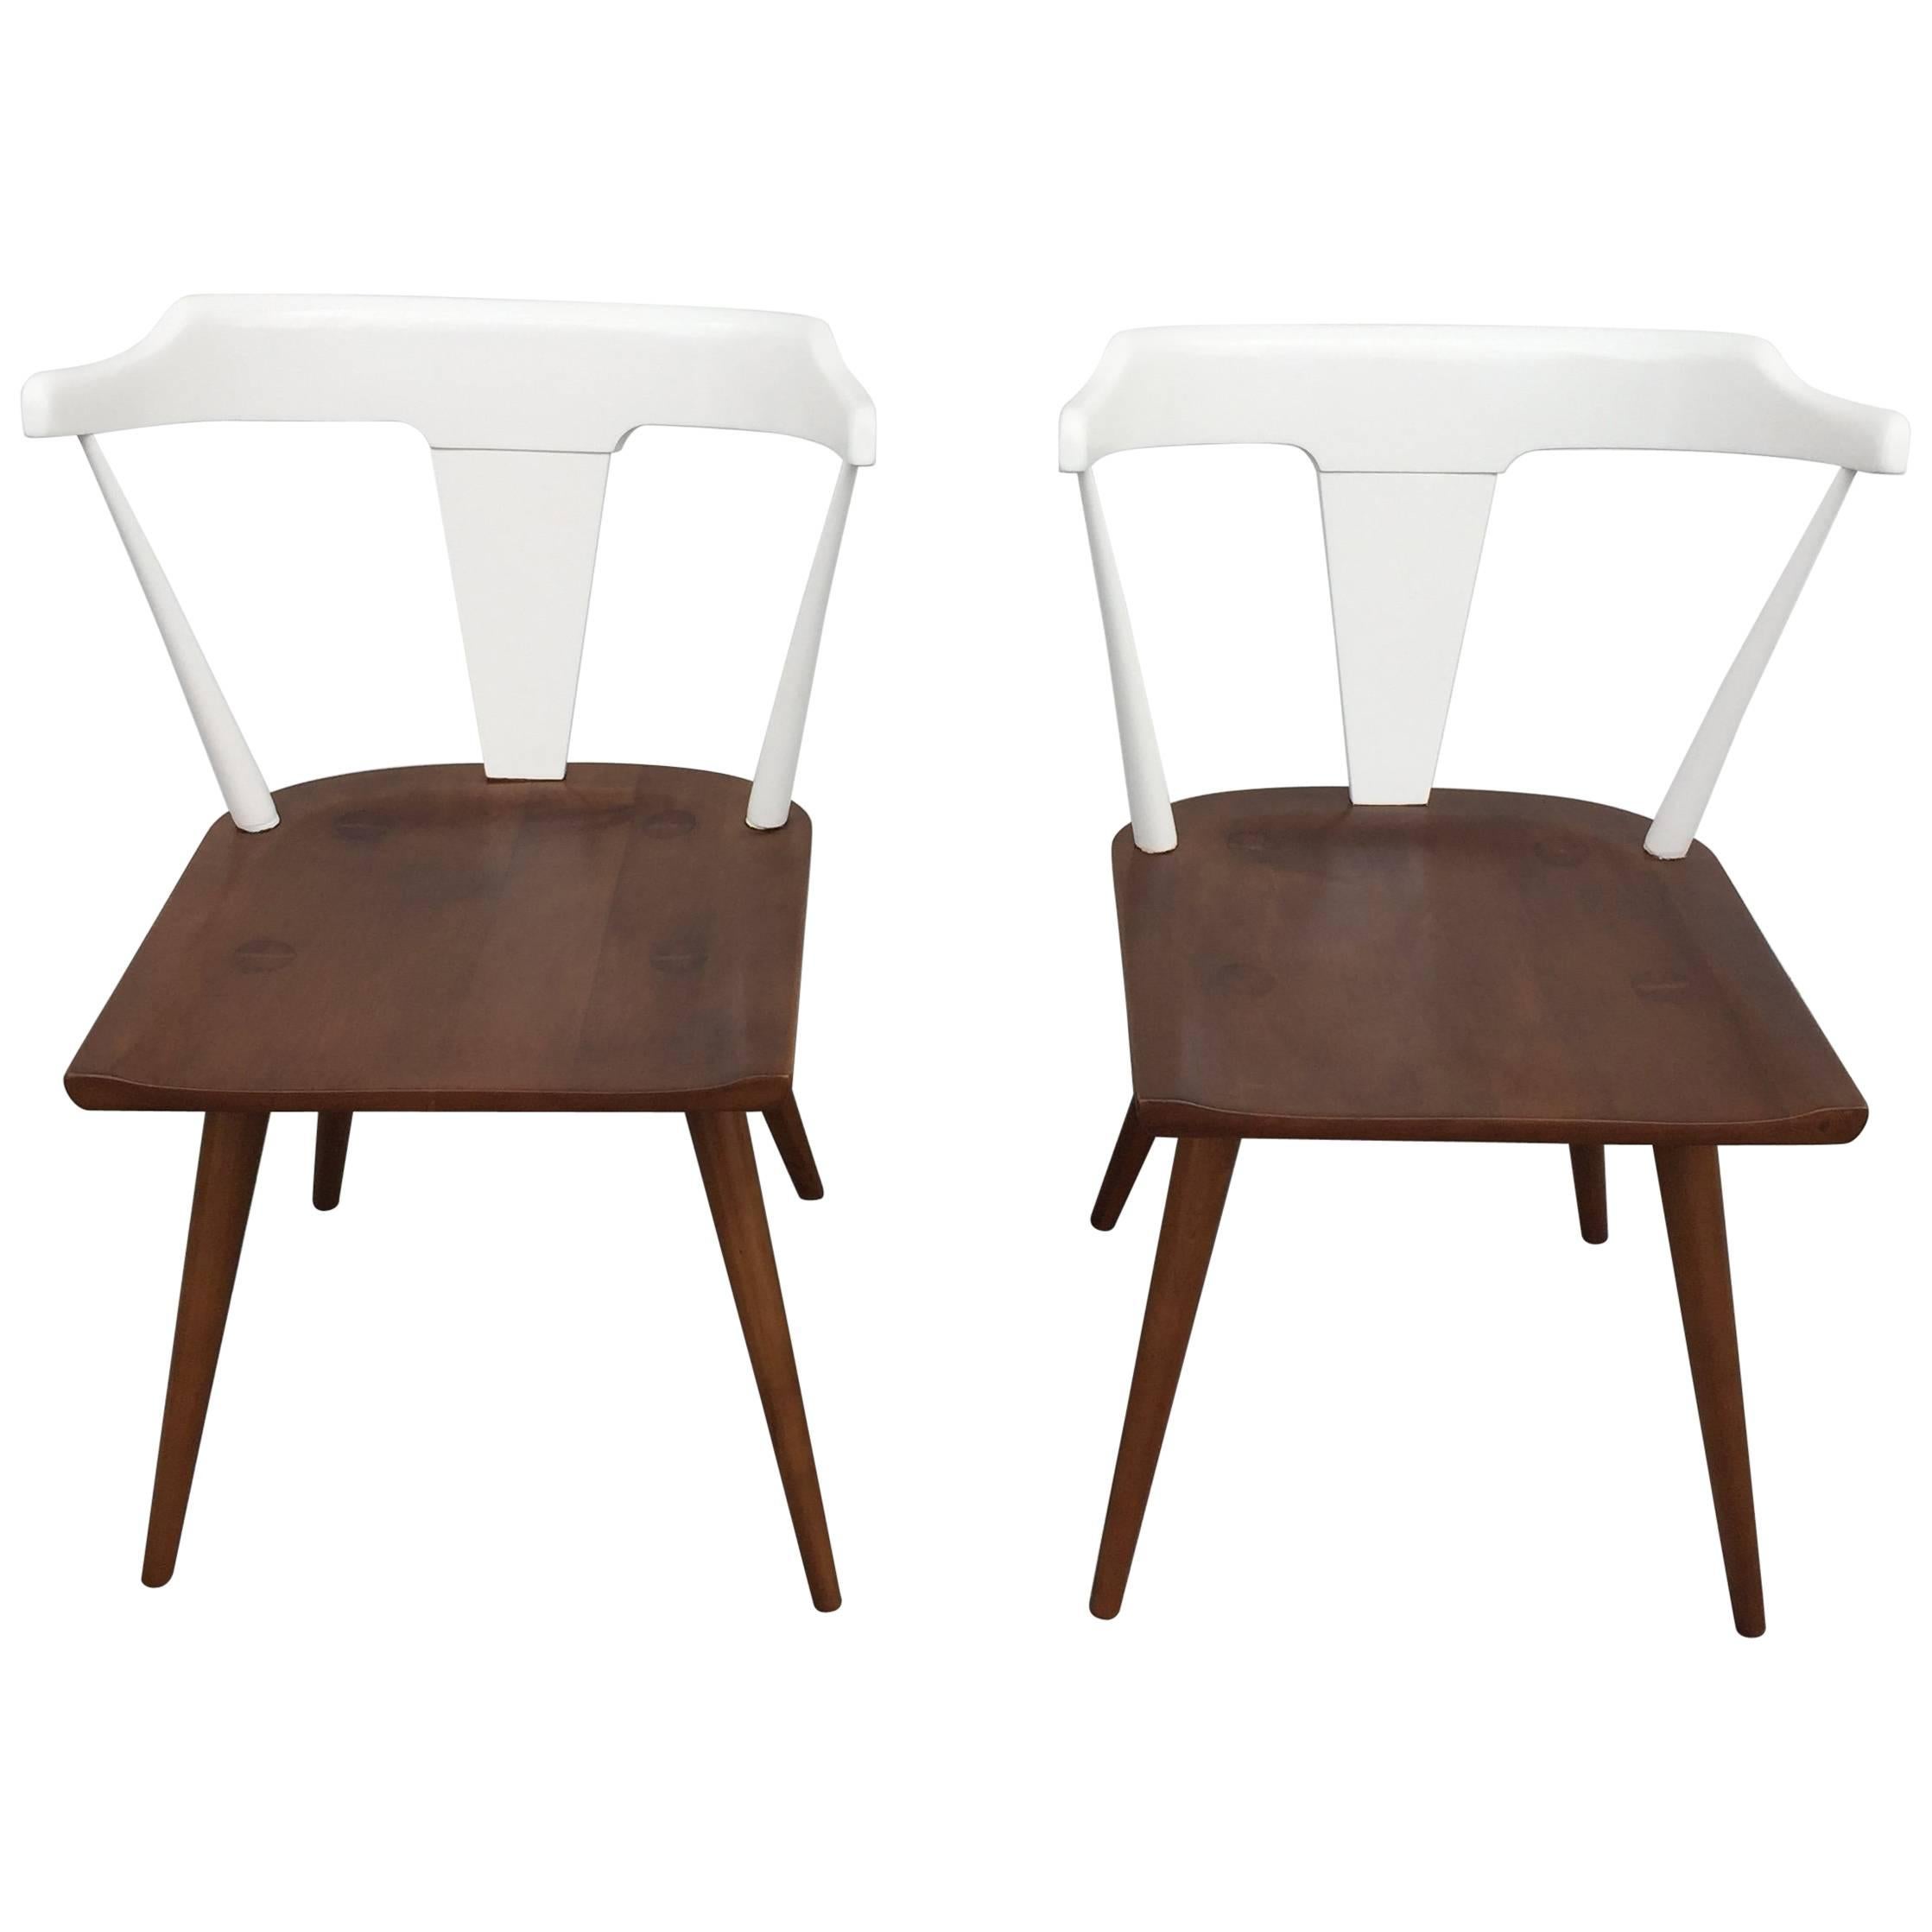 Vintage Paul McCobb Two-Tone Planner Chairs, PAIR For Sale